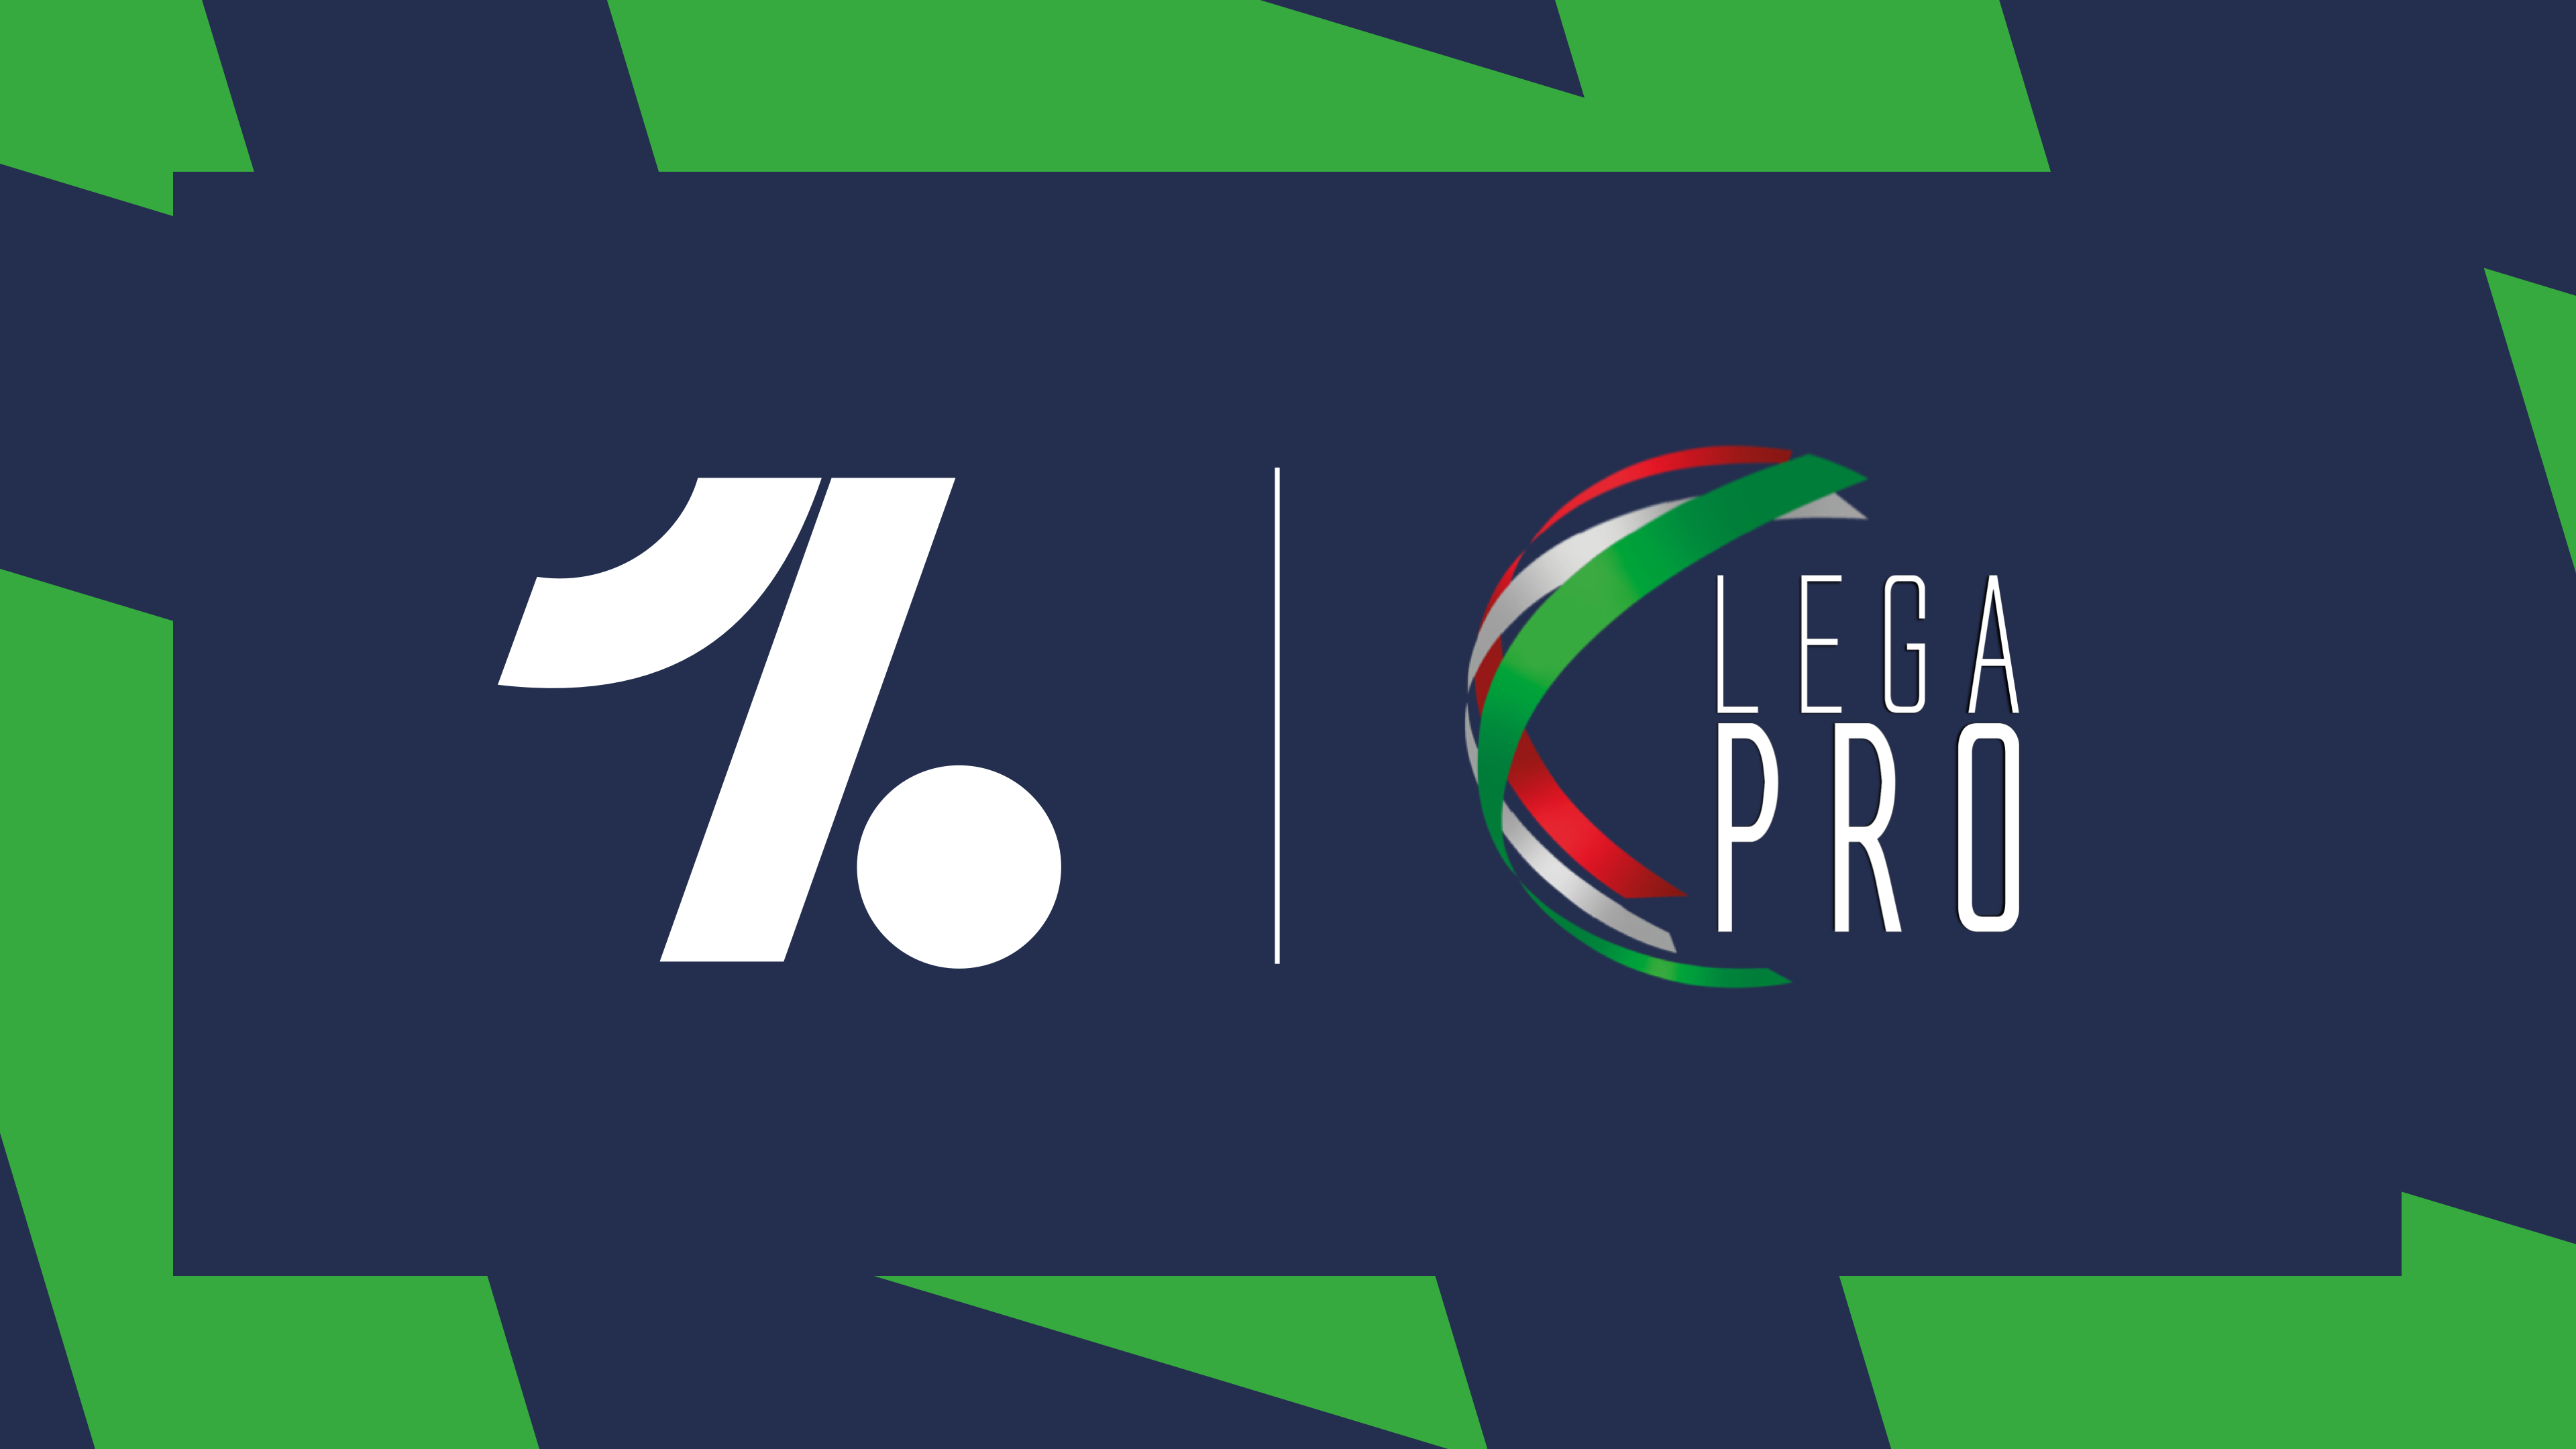 Lega Pro partners with OneFootball to deliver official Serie C content to fans